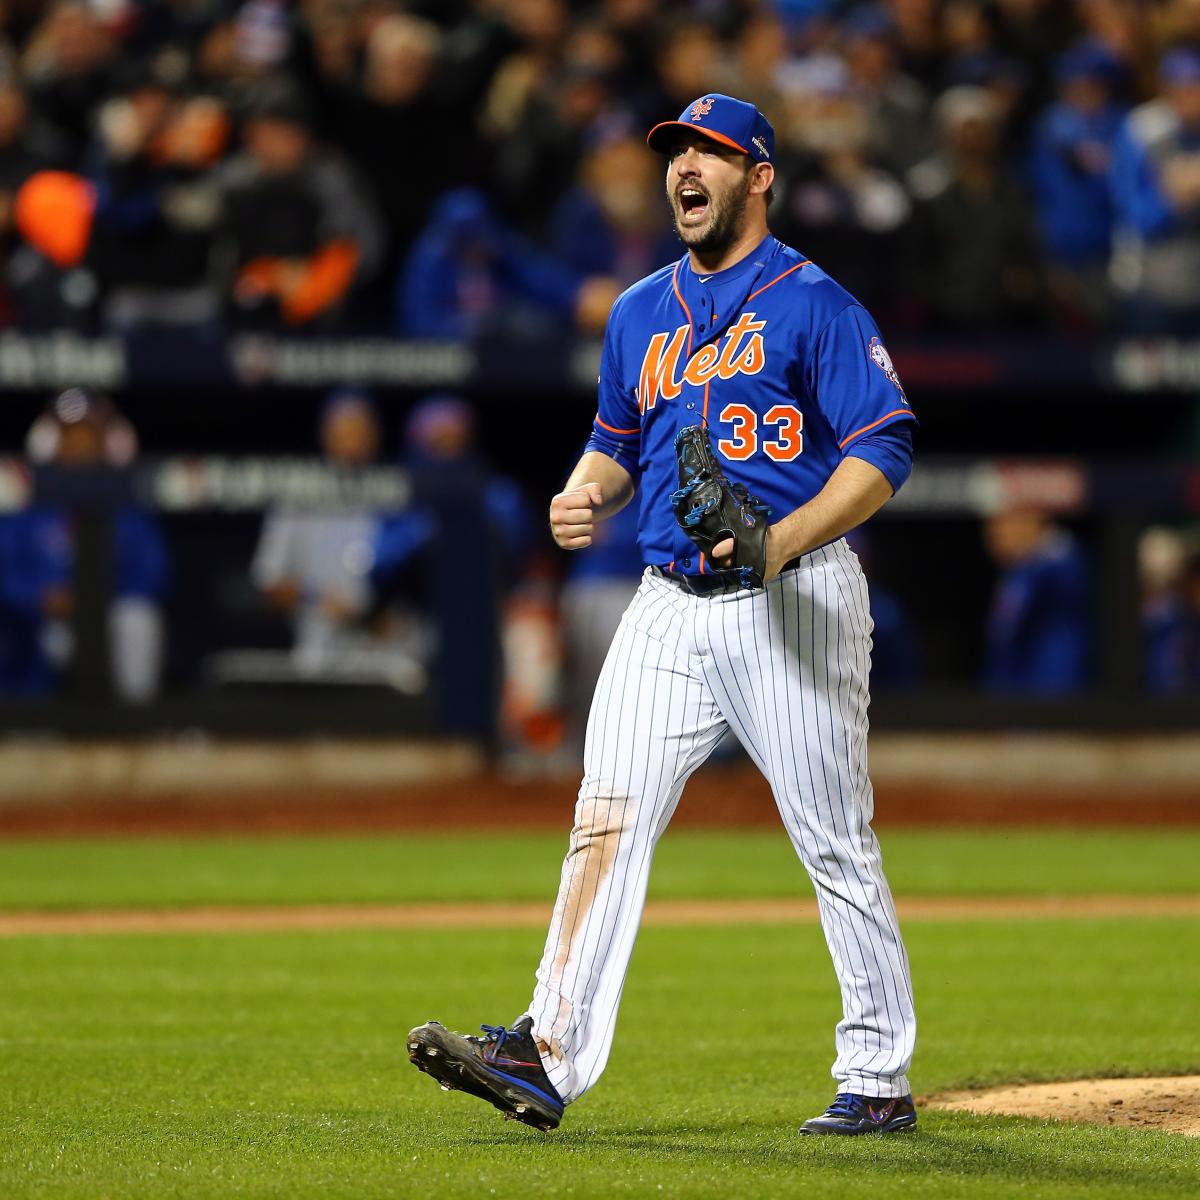 Cubs vs. Mets Game 1 Live NLCS Score and Highlights News, Scores